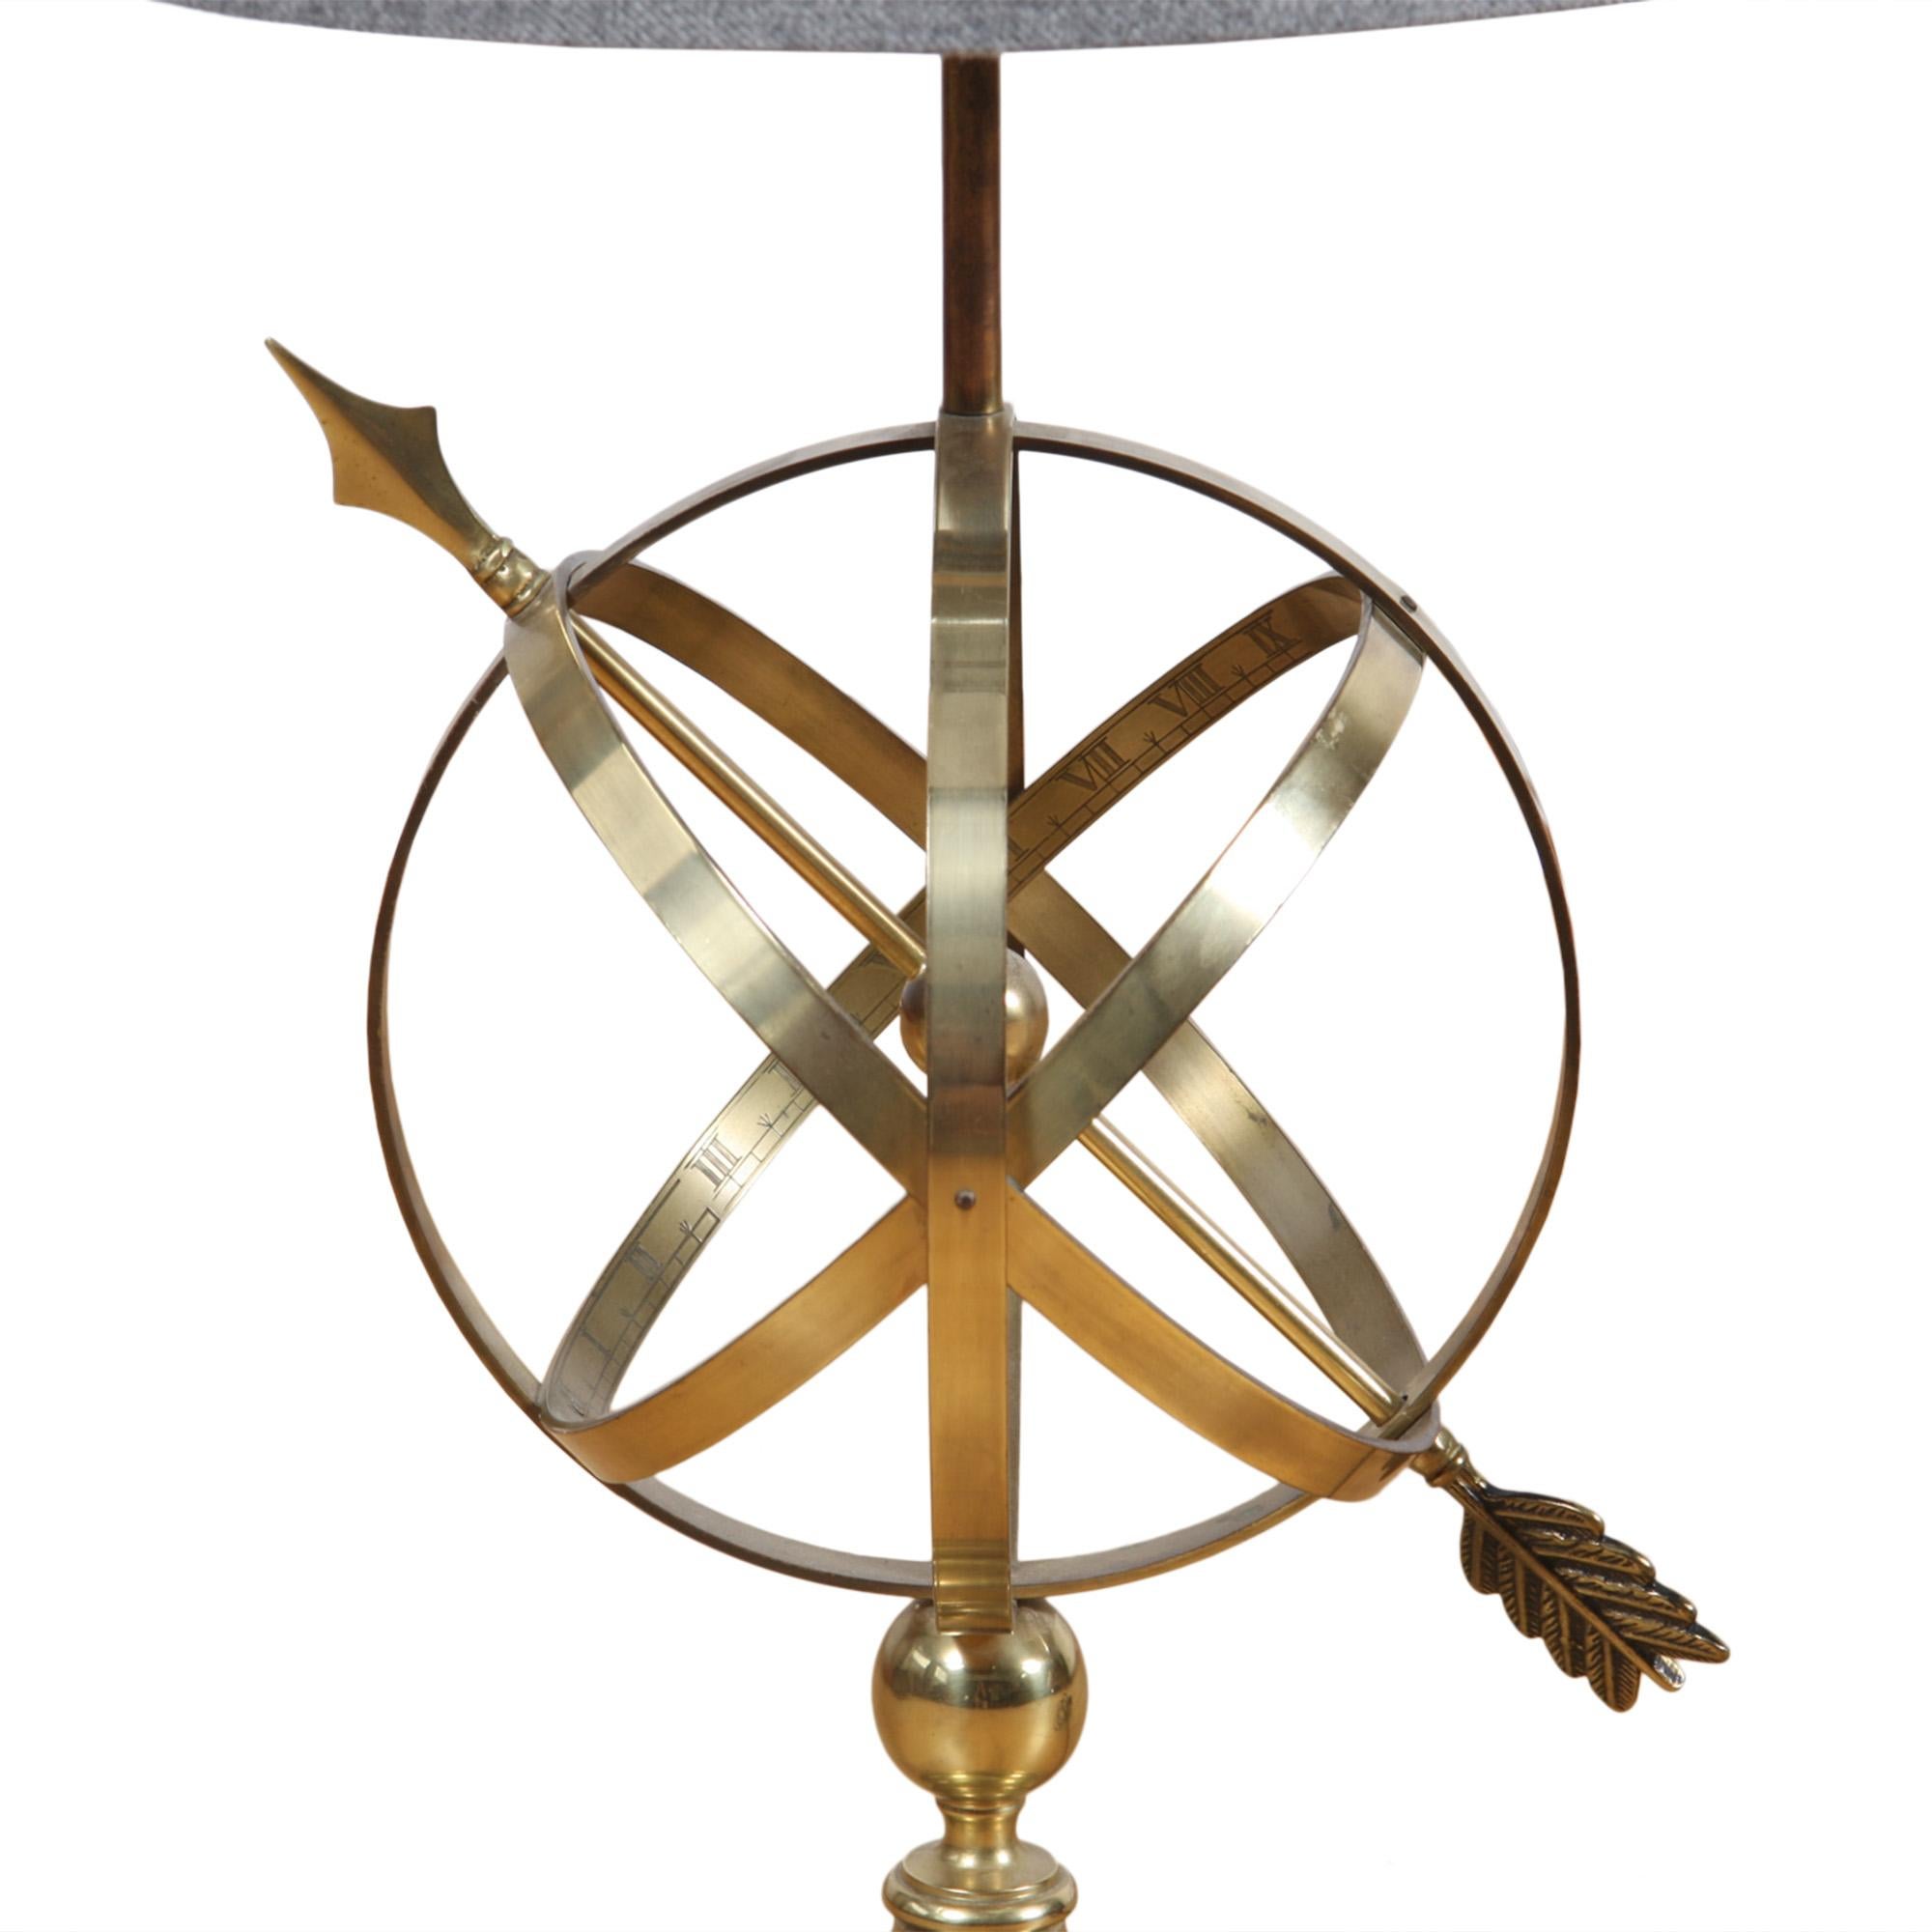 Also known as an equatorial sundial, invented by the ancient Greeks, an armillary is a model of the universe with Earth at the centre.

This great vintage table lamp was made in England in the 1950s. 

Please see the close up picture of the